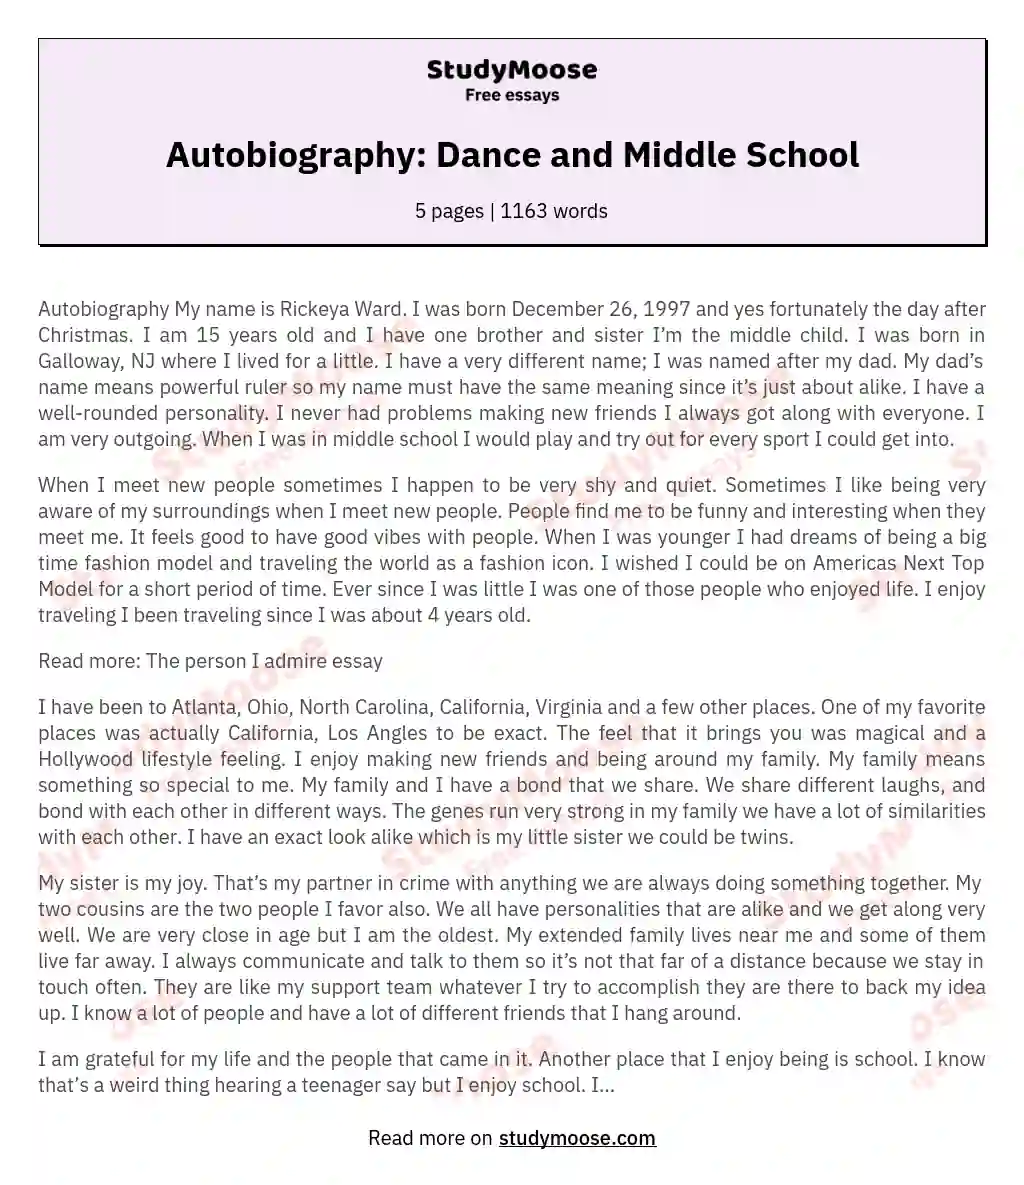 Autobiography: Dance and Middle School essay